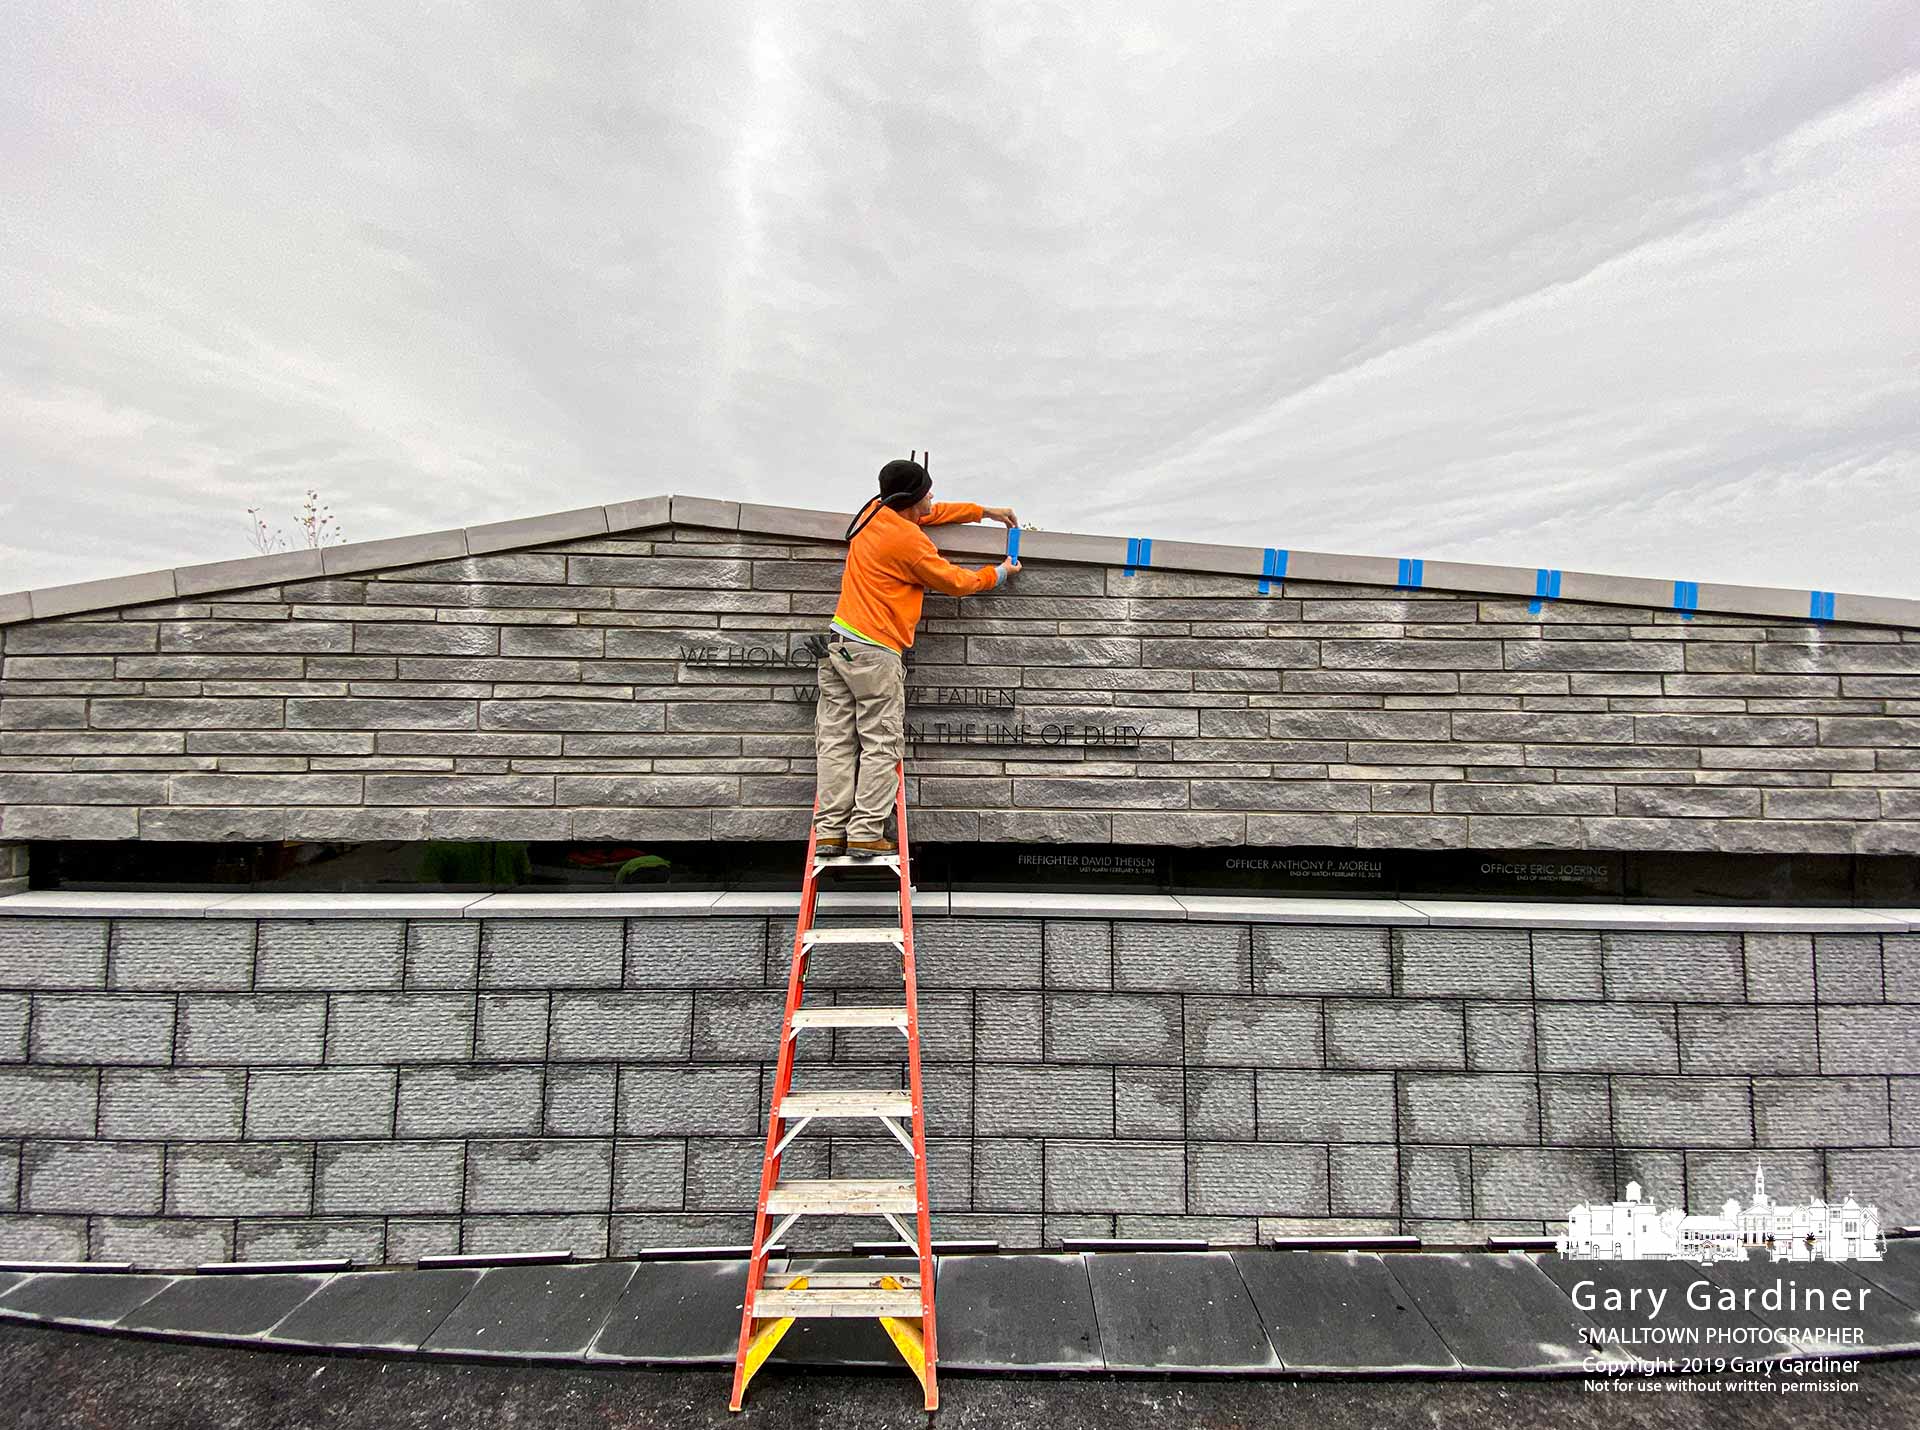 A construction worker places protective tape on seams between sections of the new fountain wall in First Responders Park before sealing them as the park nears completion. My Final Photo for Oct. 25, 2019.